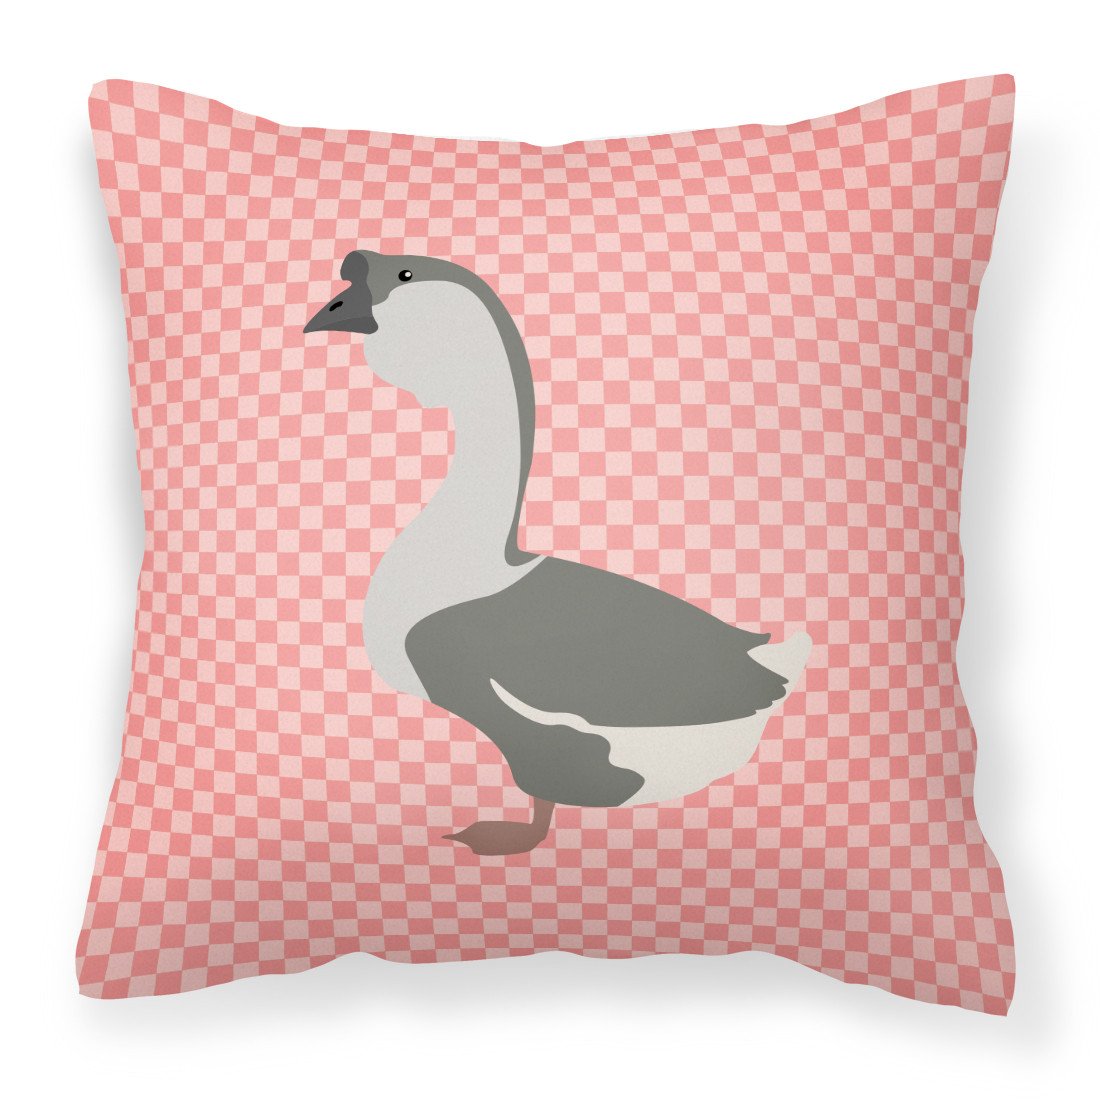 African Goose Pink Check Fabric Decorative Pillow BB7899PW1818 by Caroline's Treasures